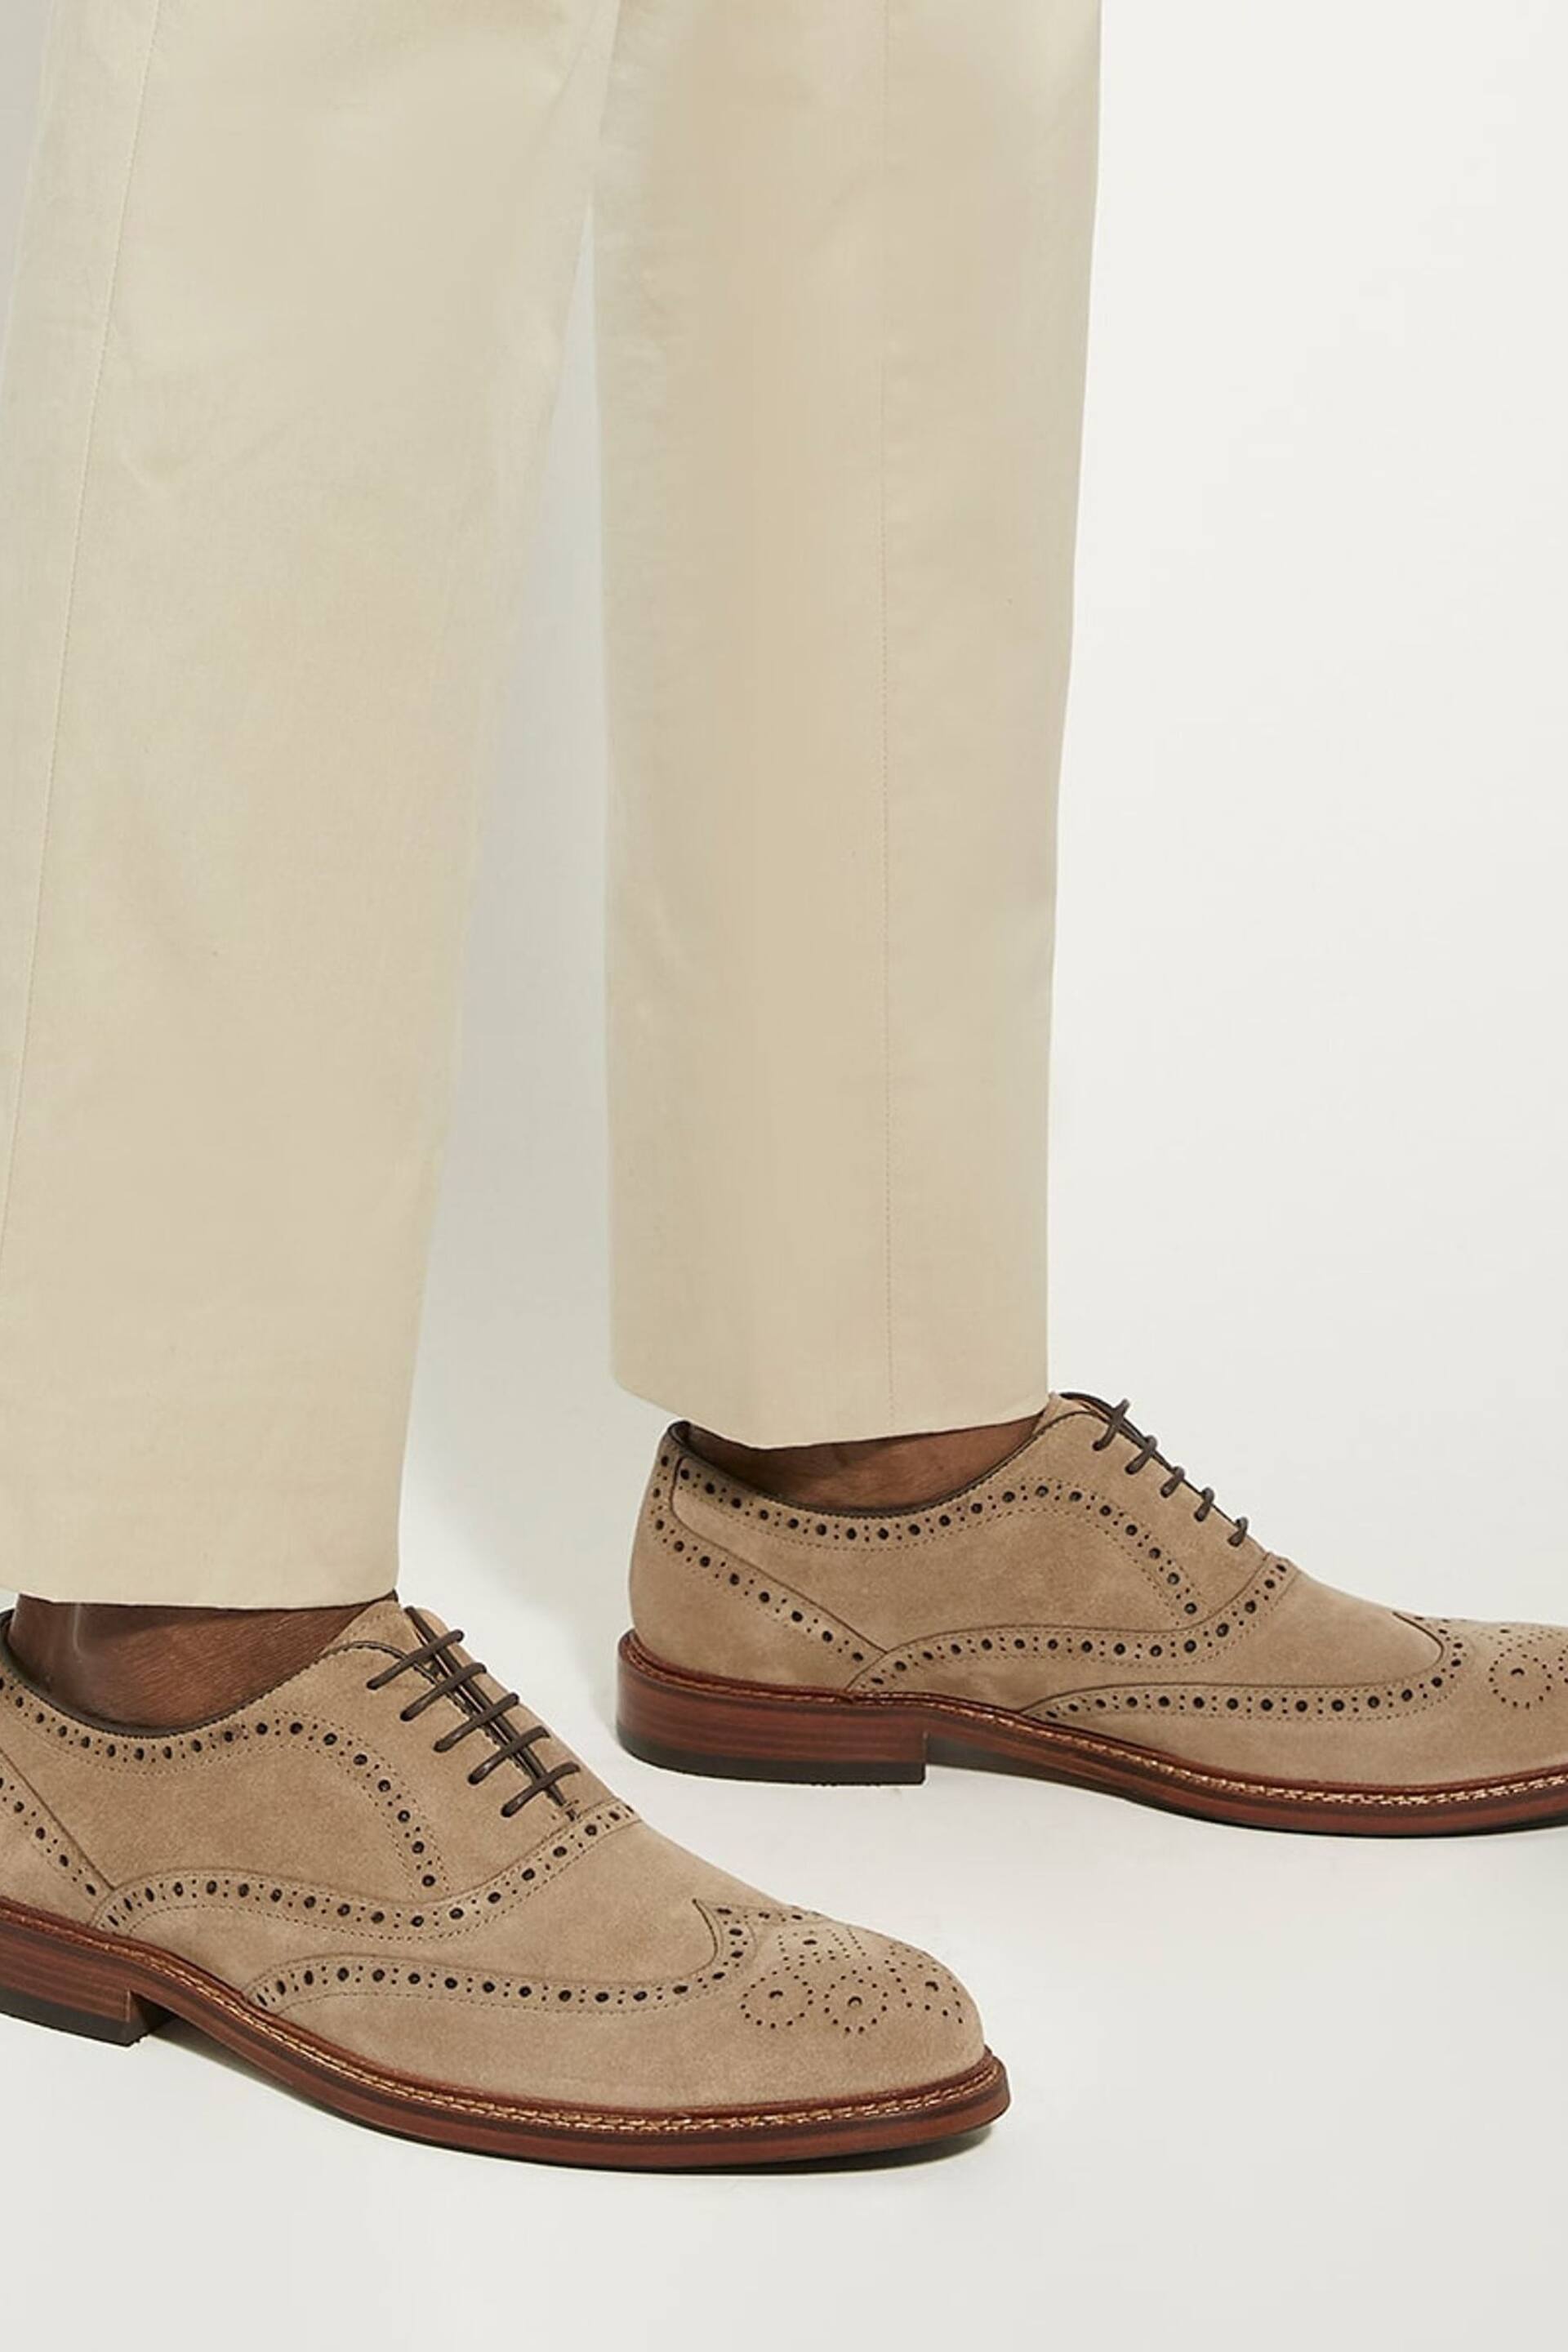 Dune London Brown Ground Solihull Oxford Brogues - Image 3 of 6